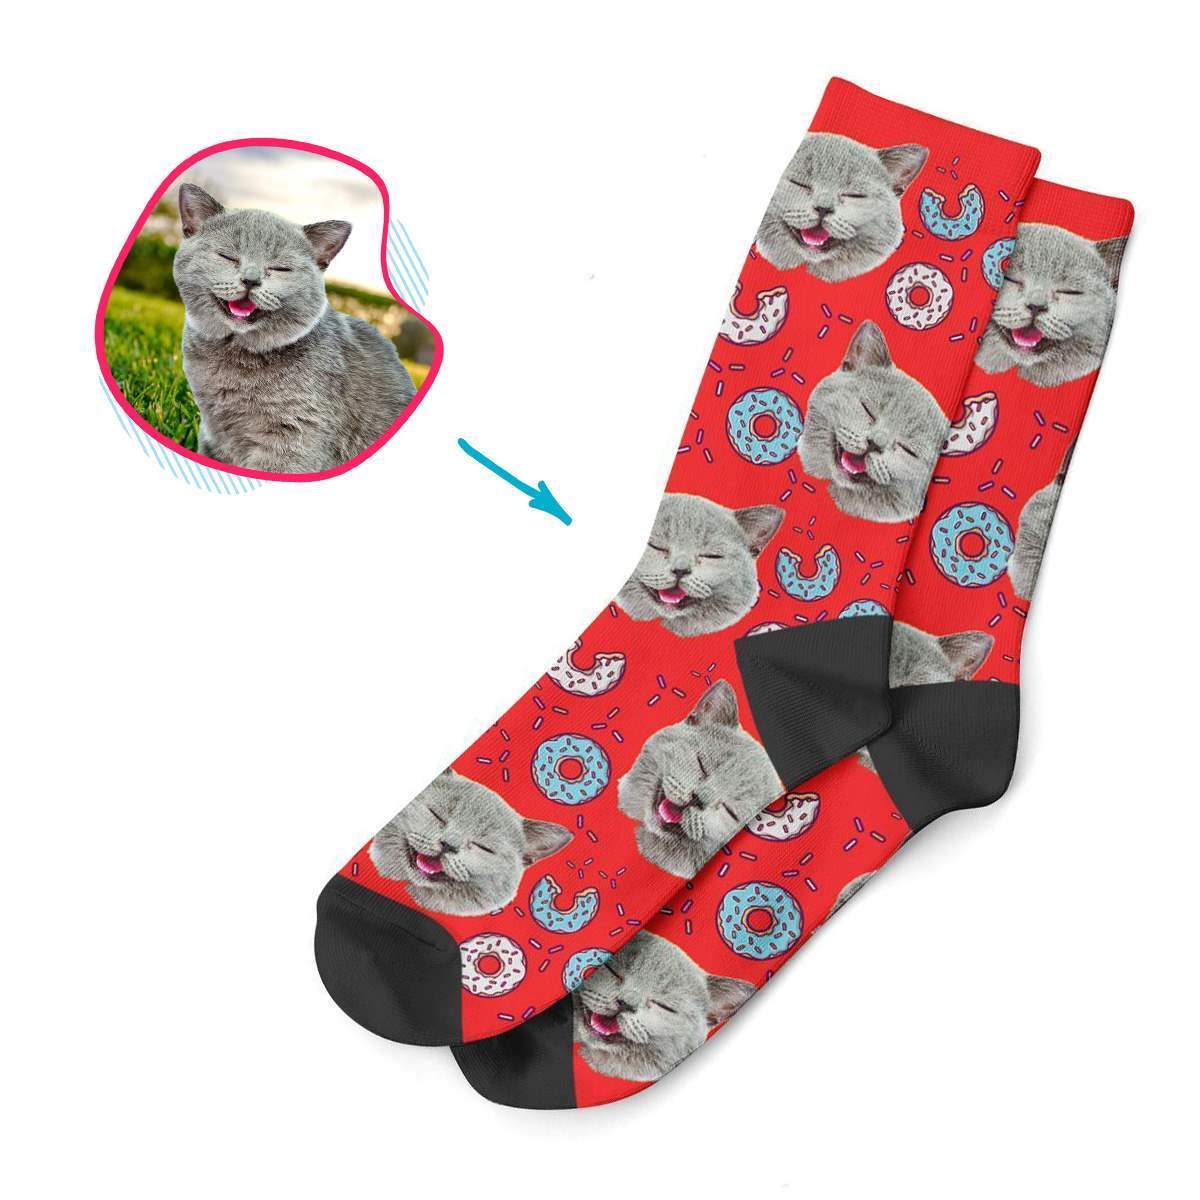 red Donuts socks personalized with photo of face printed on them